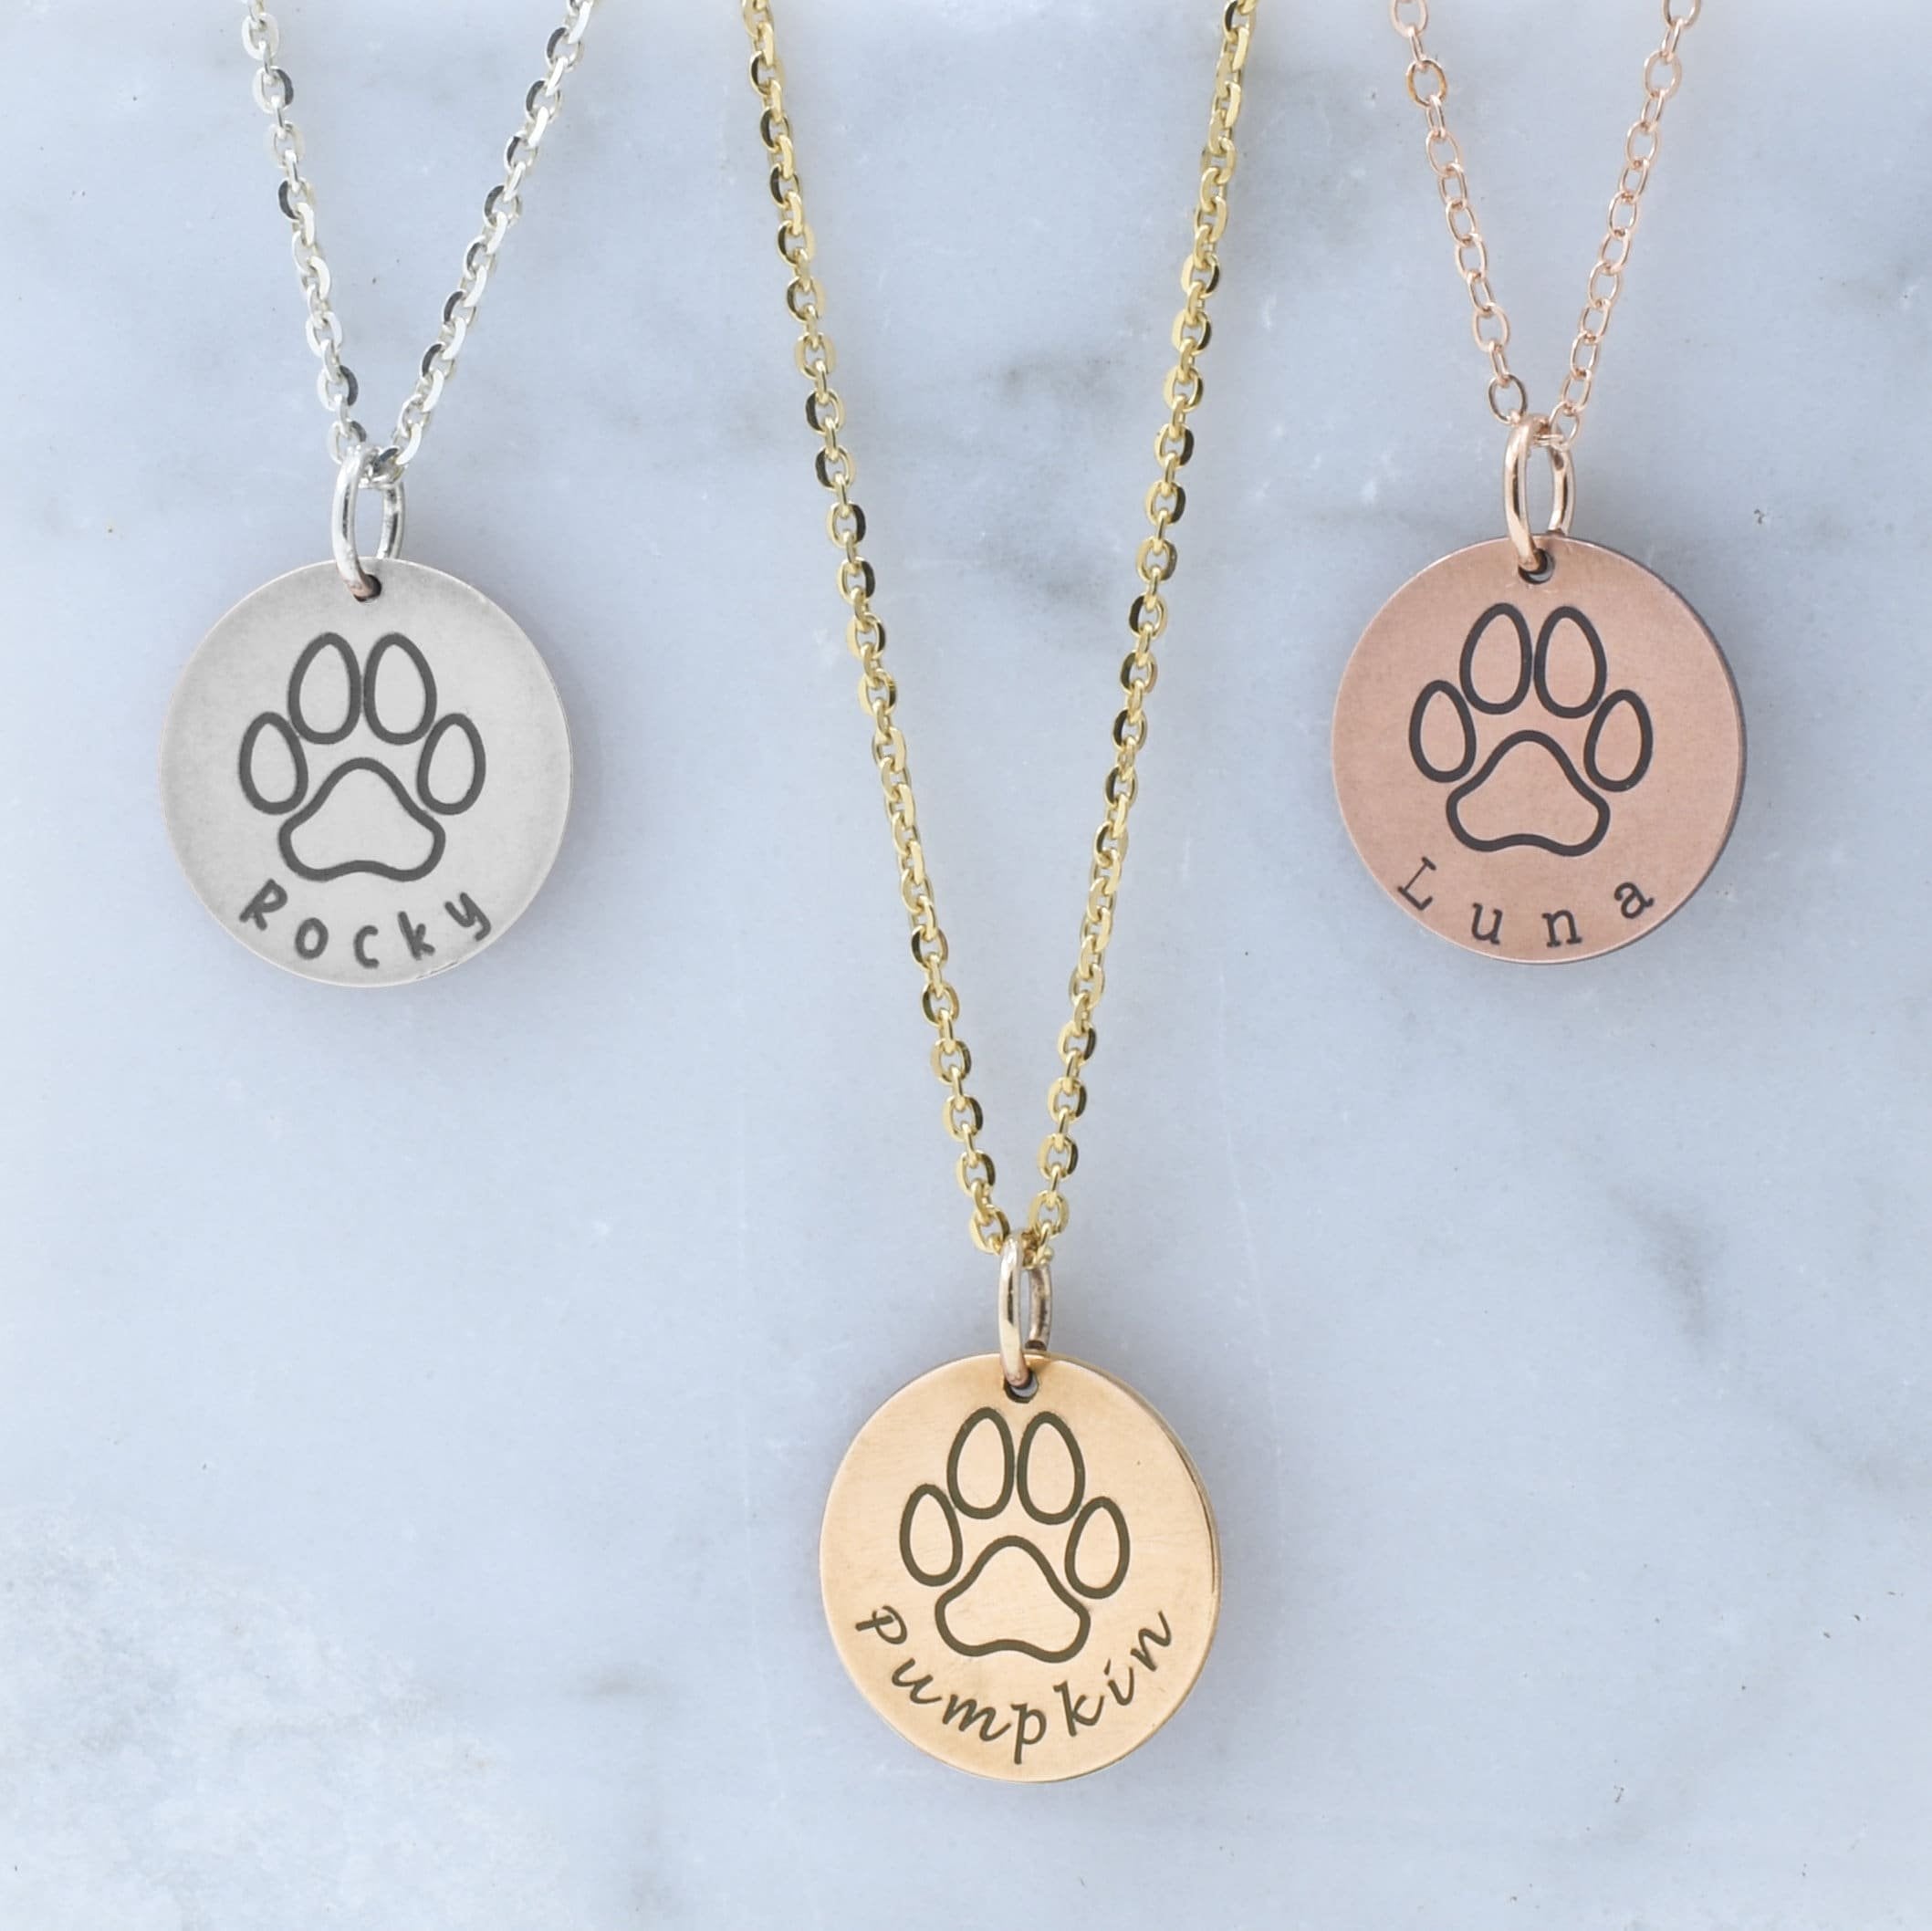 Custom Necklace for Dog Mom, Jewelry Custom Dog Charm Necklace, Rose Gold  Engraved, Dog Breed Necklace, Pet Jewelry Pet Gift Friend Gifts